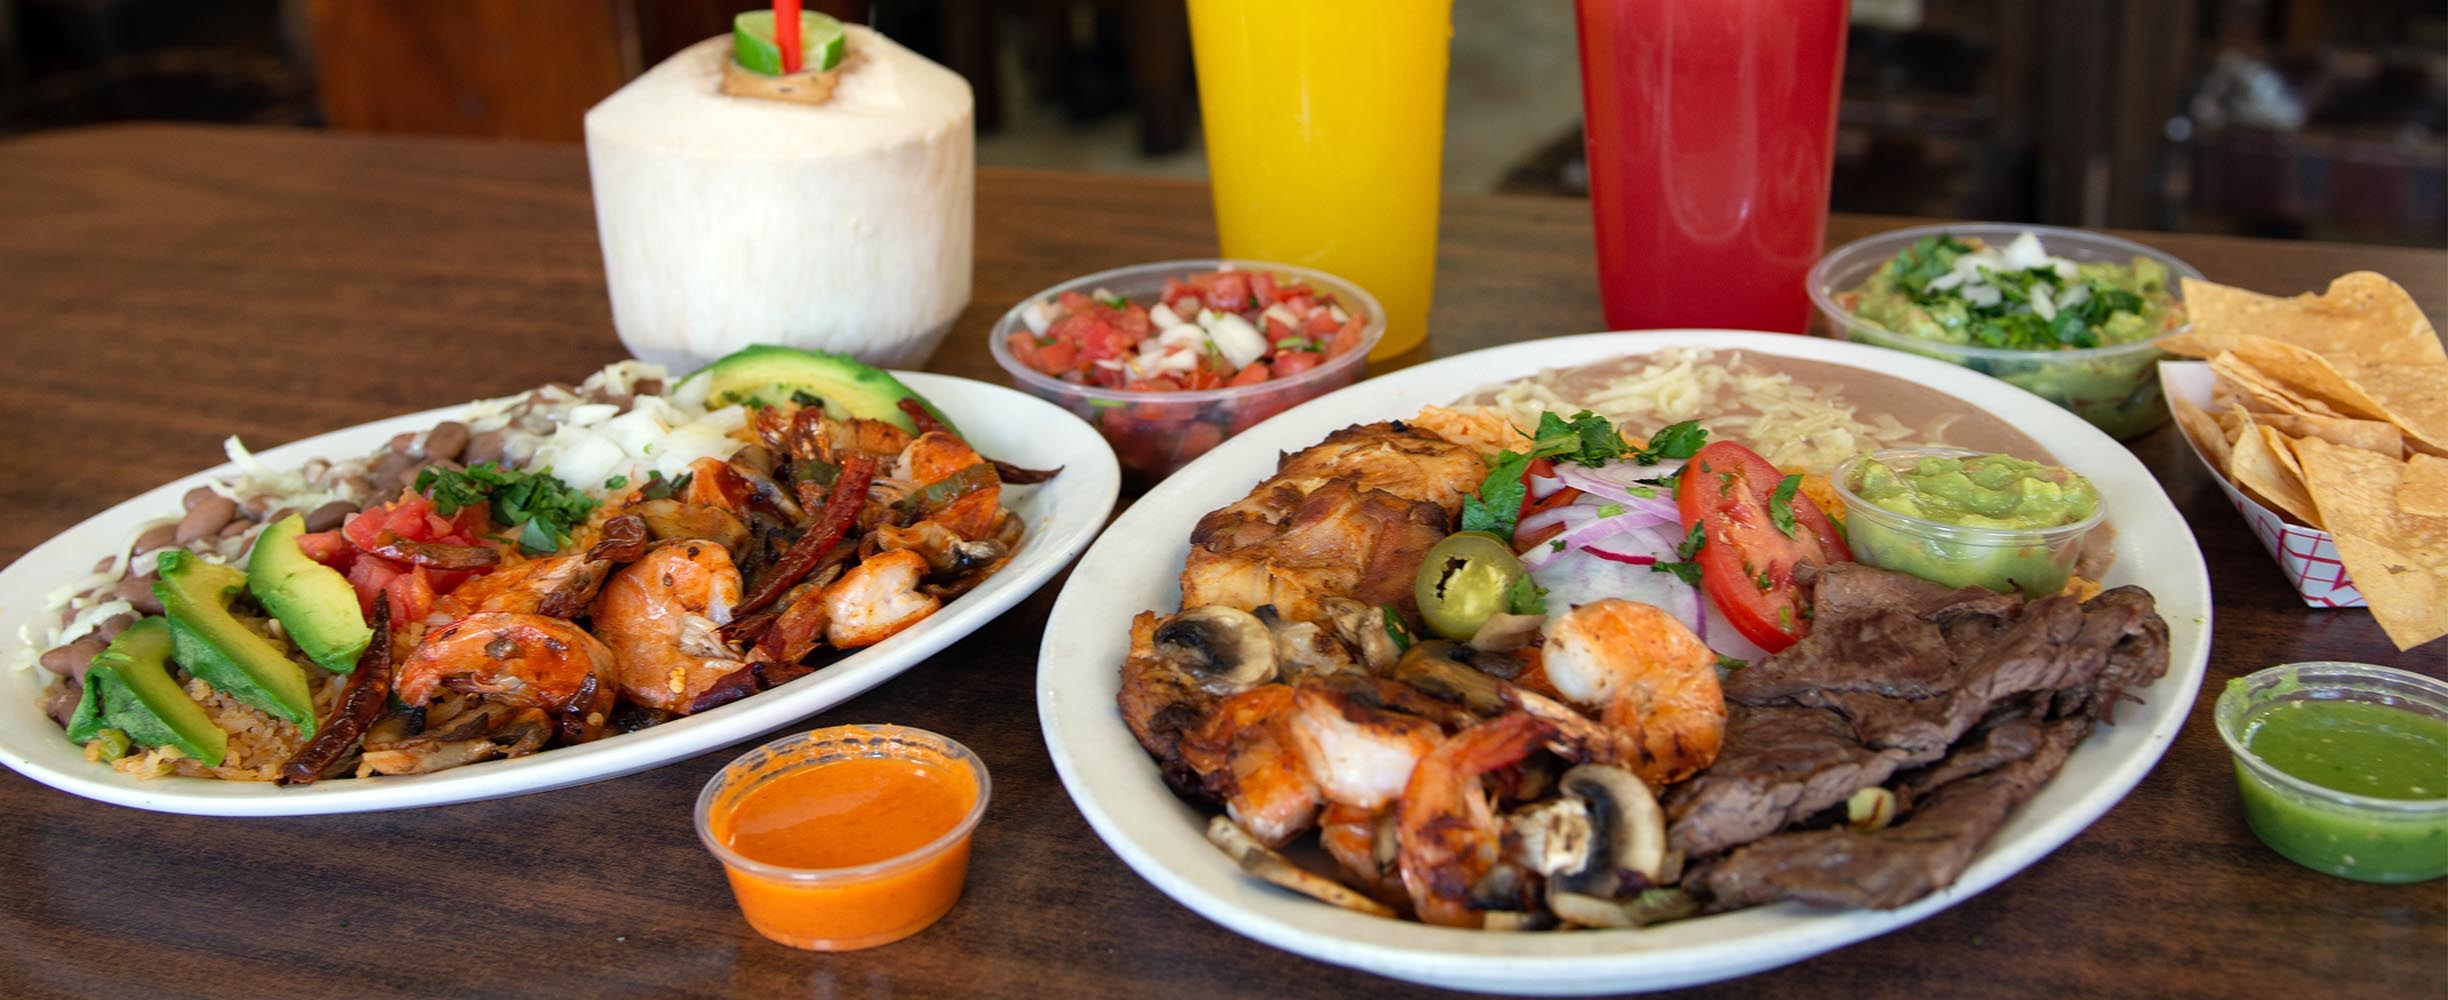 Mexican restaurant in San francisco with a variety of platters including meat, shrimp, beans, carnitas and almost any combination of mexican food. 